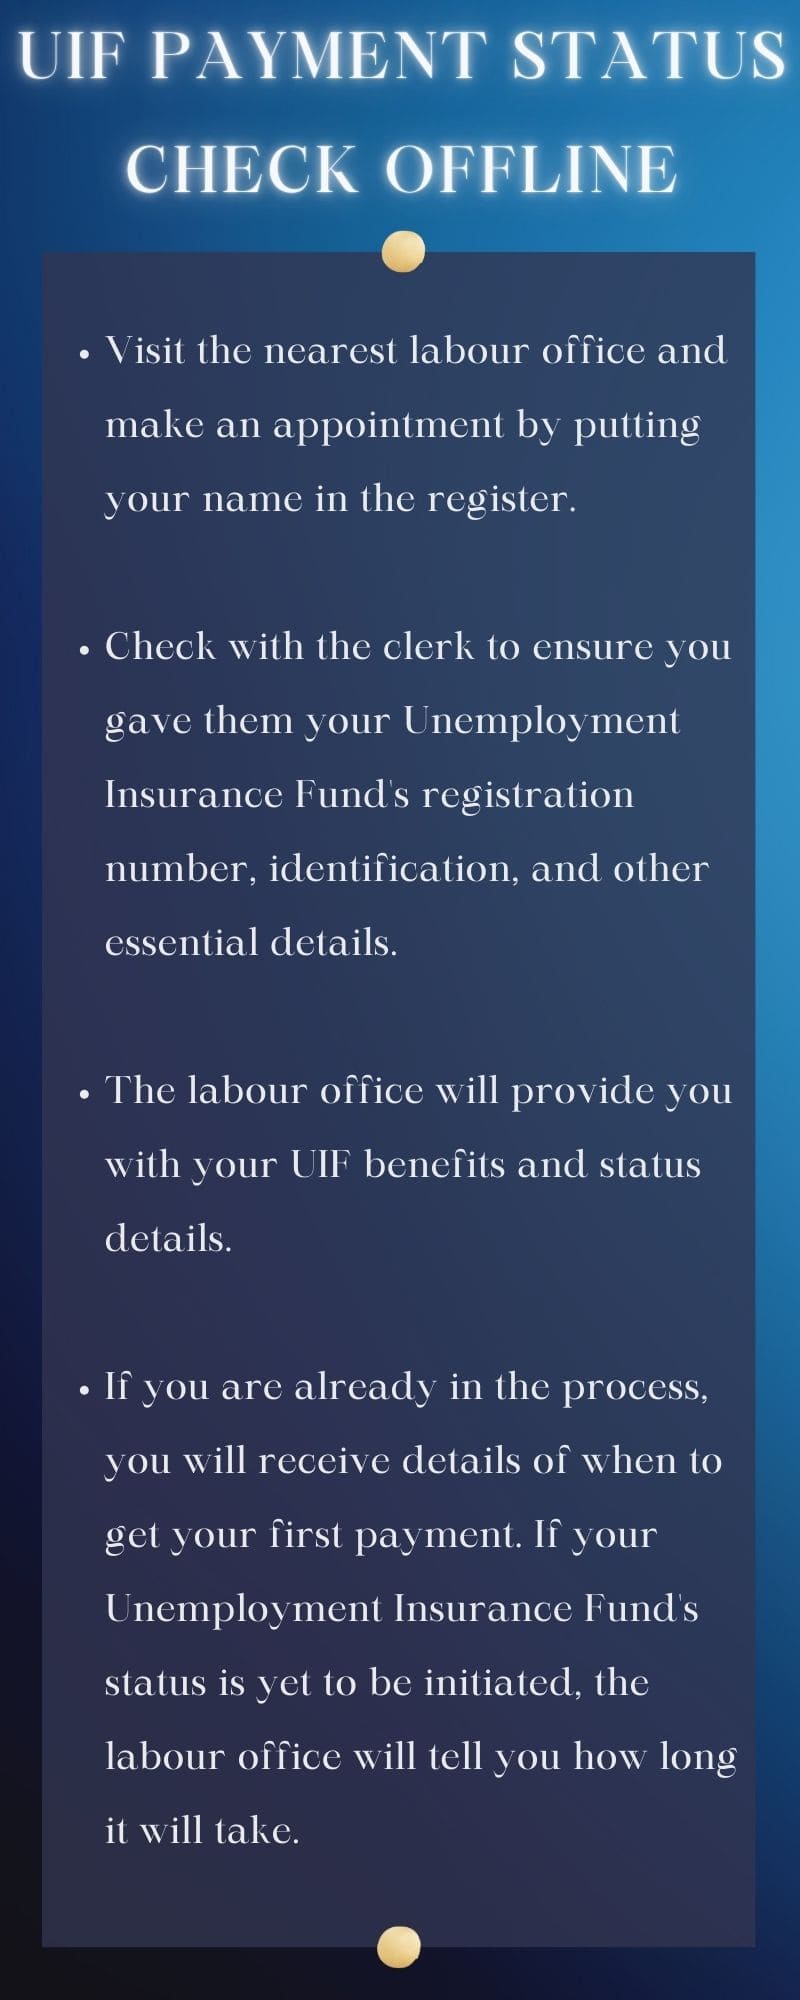 How to check UIF payout